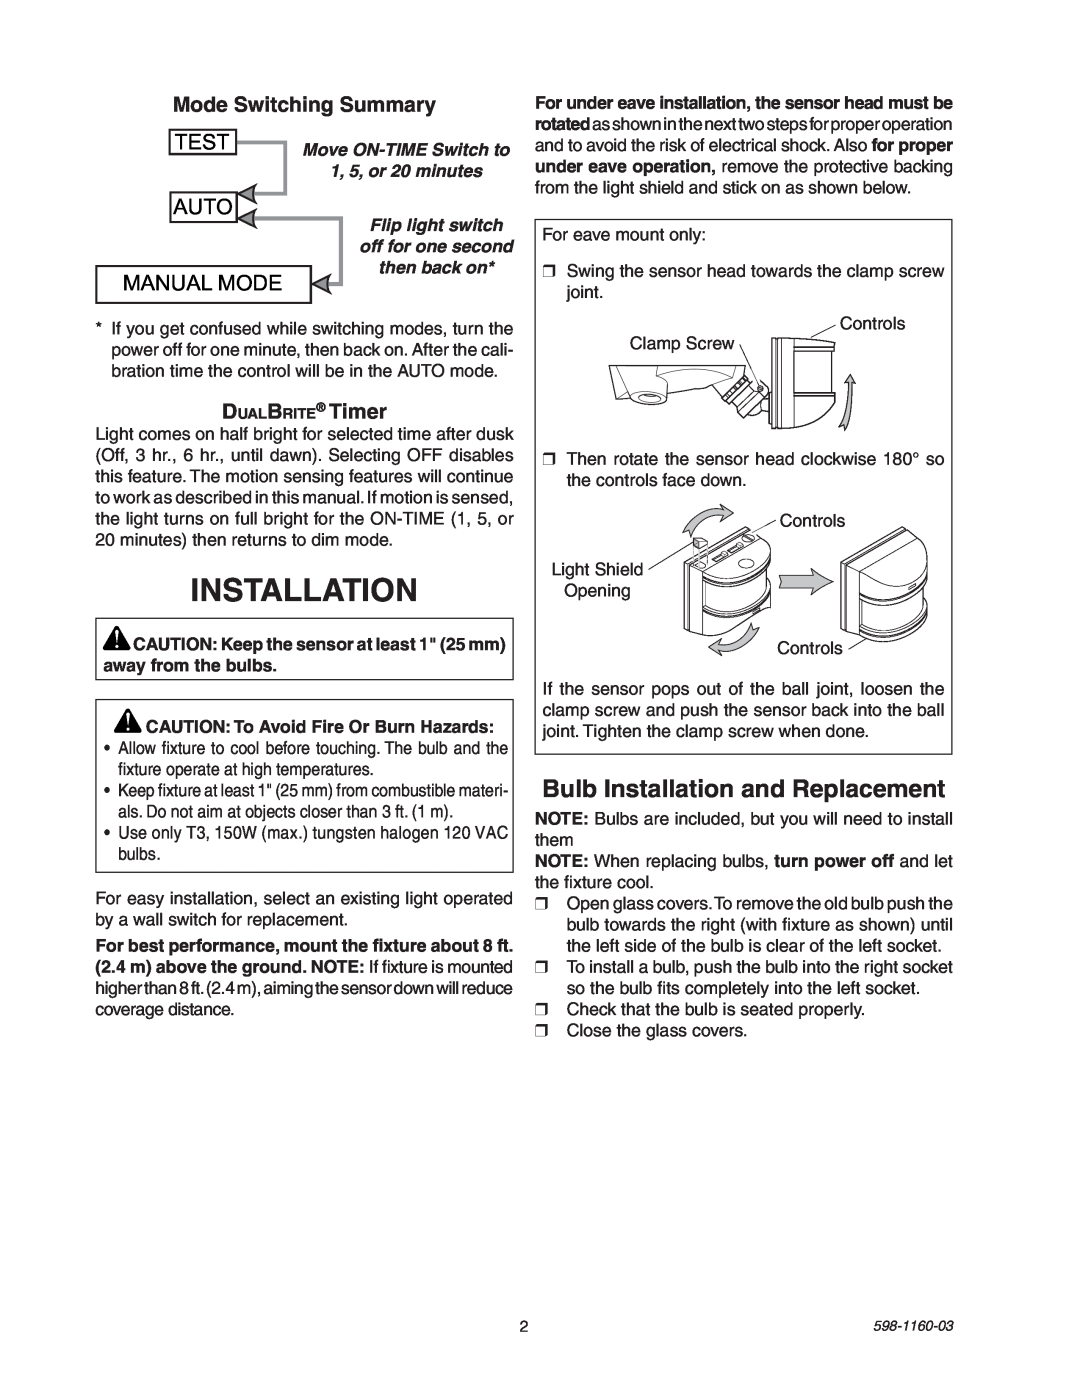 Heath Zenith SH-5512 manual Bulb Installation and Replacement, Auto, Manual Mode, CAUTION To Avoid Fire Or Burn Hazards 